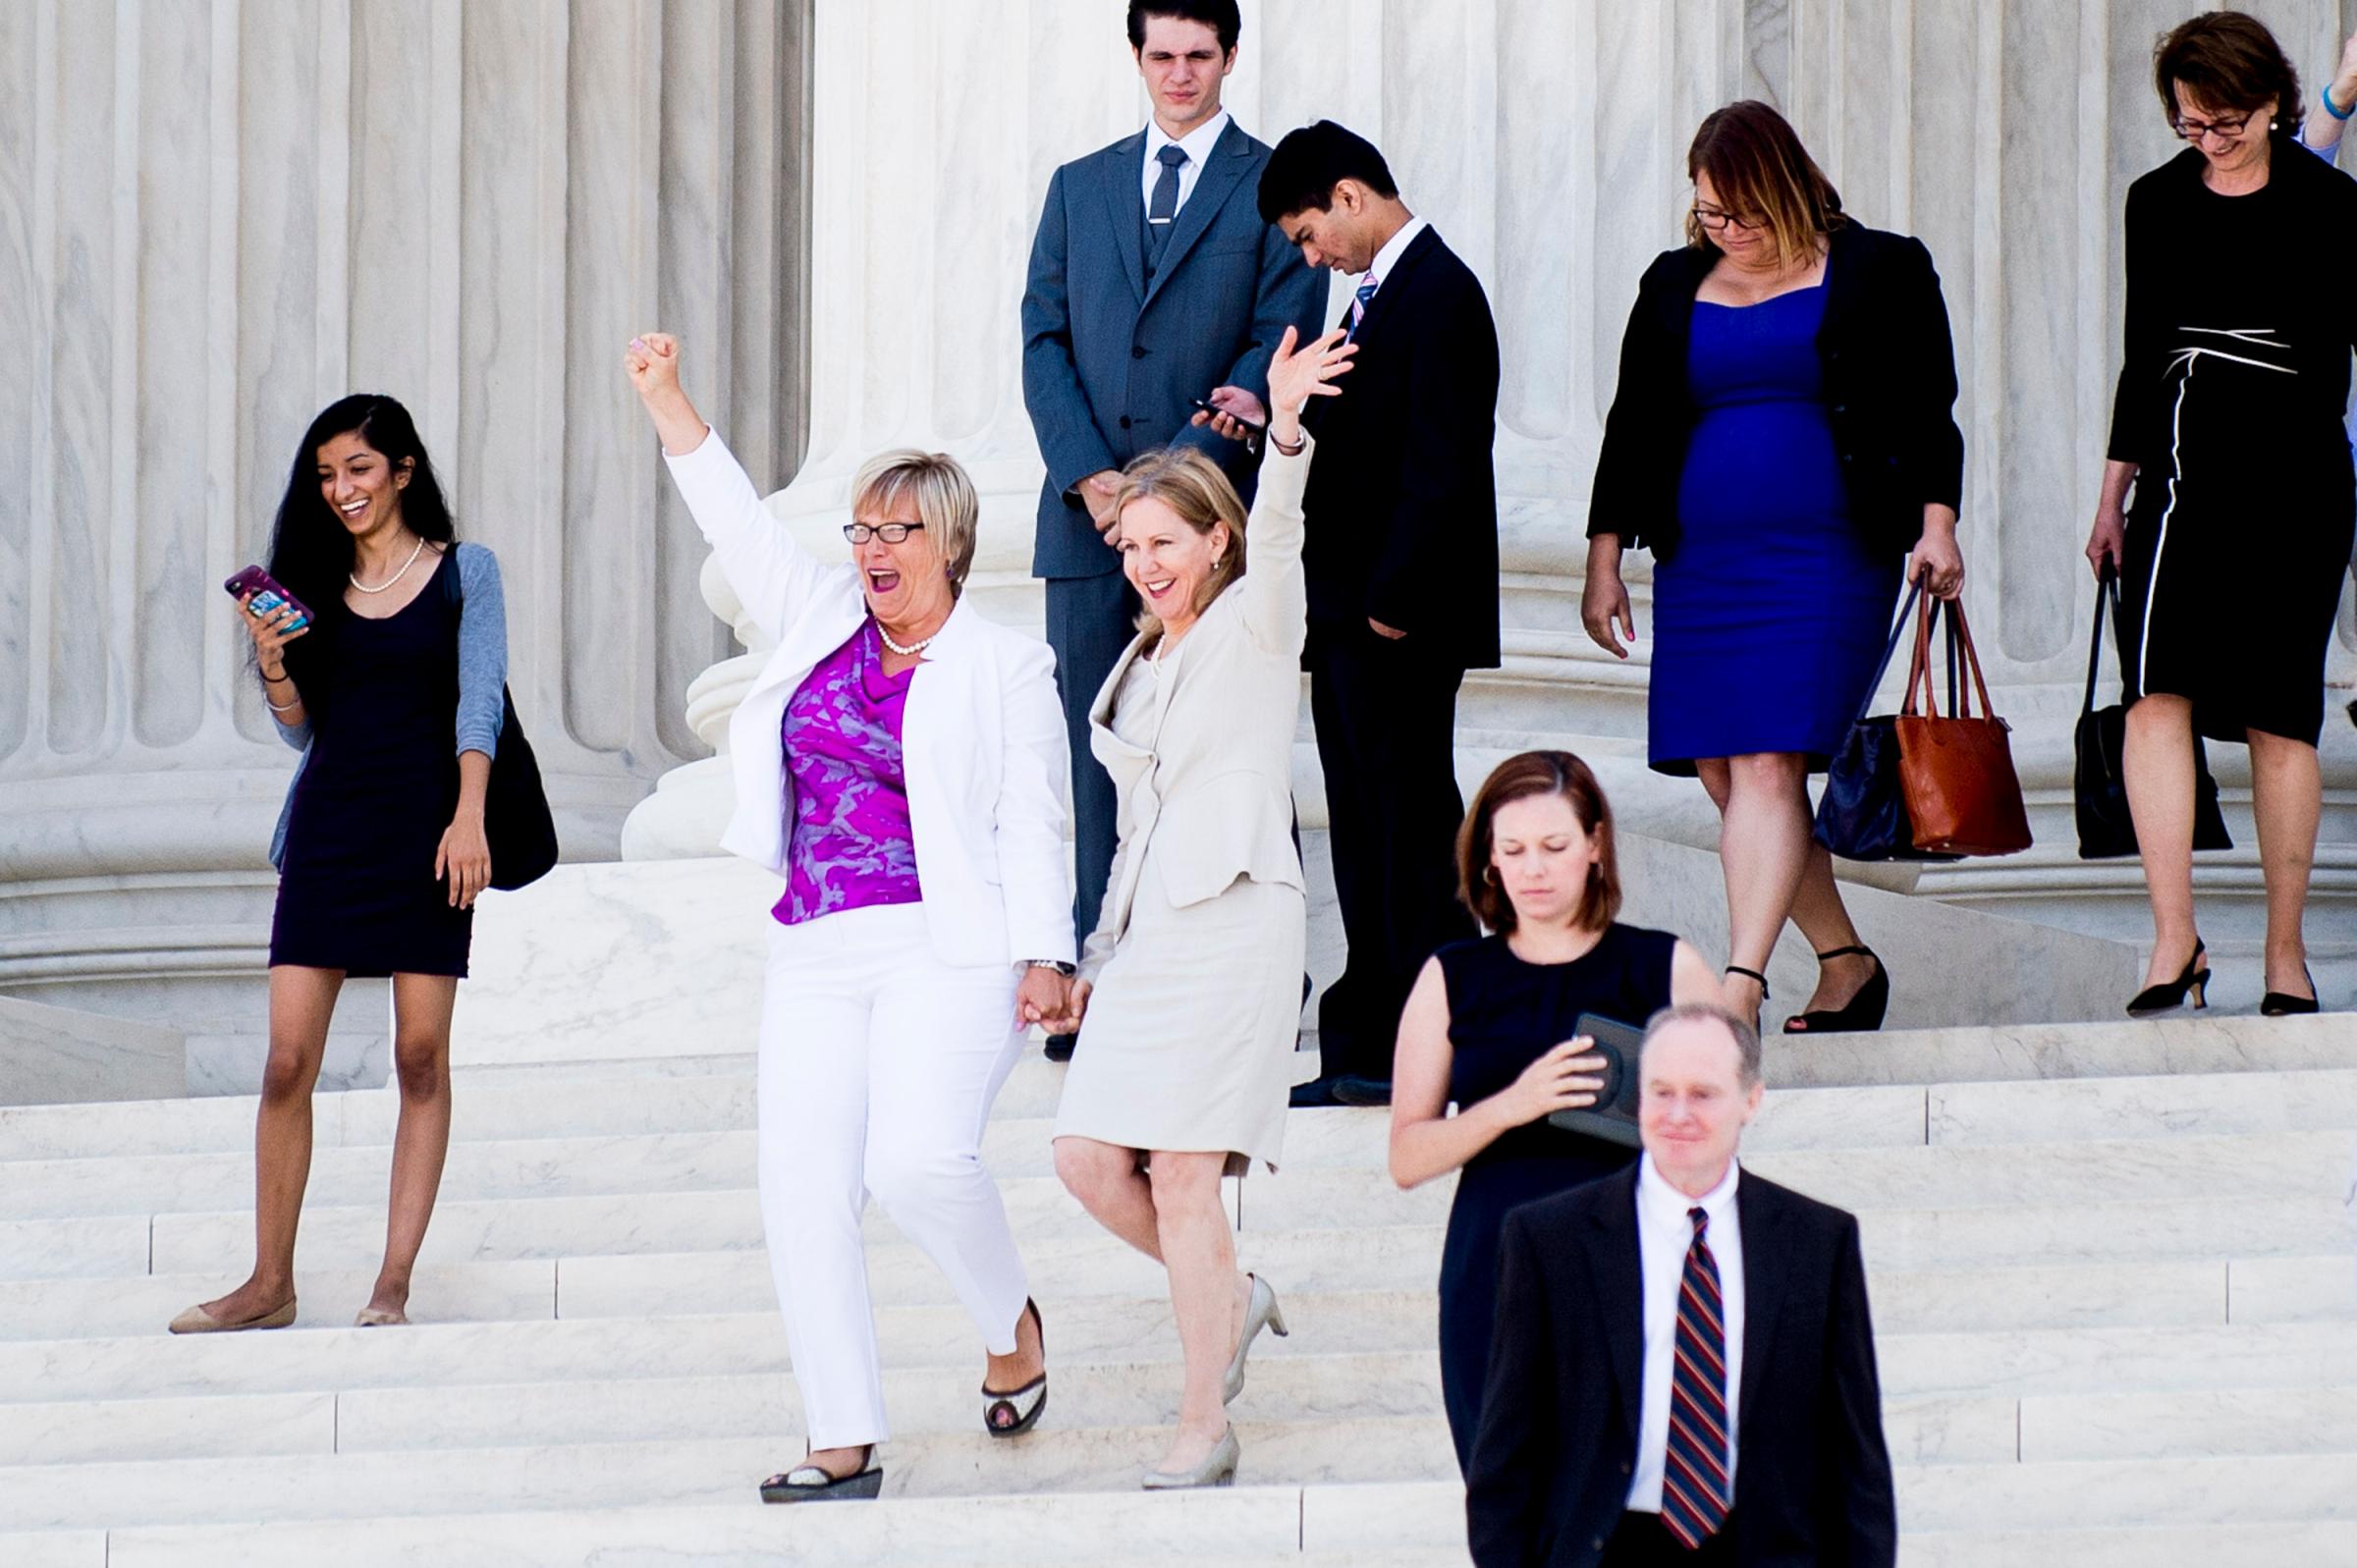 Texas abortion provider Amy Hagstrom-Miller and Nancy Northup, President of The Center for Reproductive Rights, wave to supporters as they descend the steps of the Supreme Court on June 27, 2016. In a 5-3 decision, the Court struck down one of the nation's toughest restrictions on abortion, a Texas law that women's groups said would have forced more than three-quarters of the state's clinics to close.